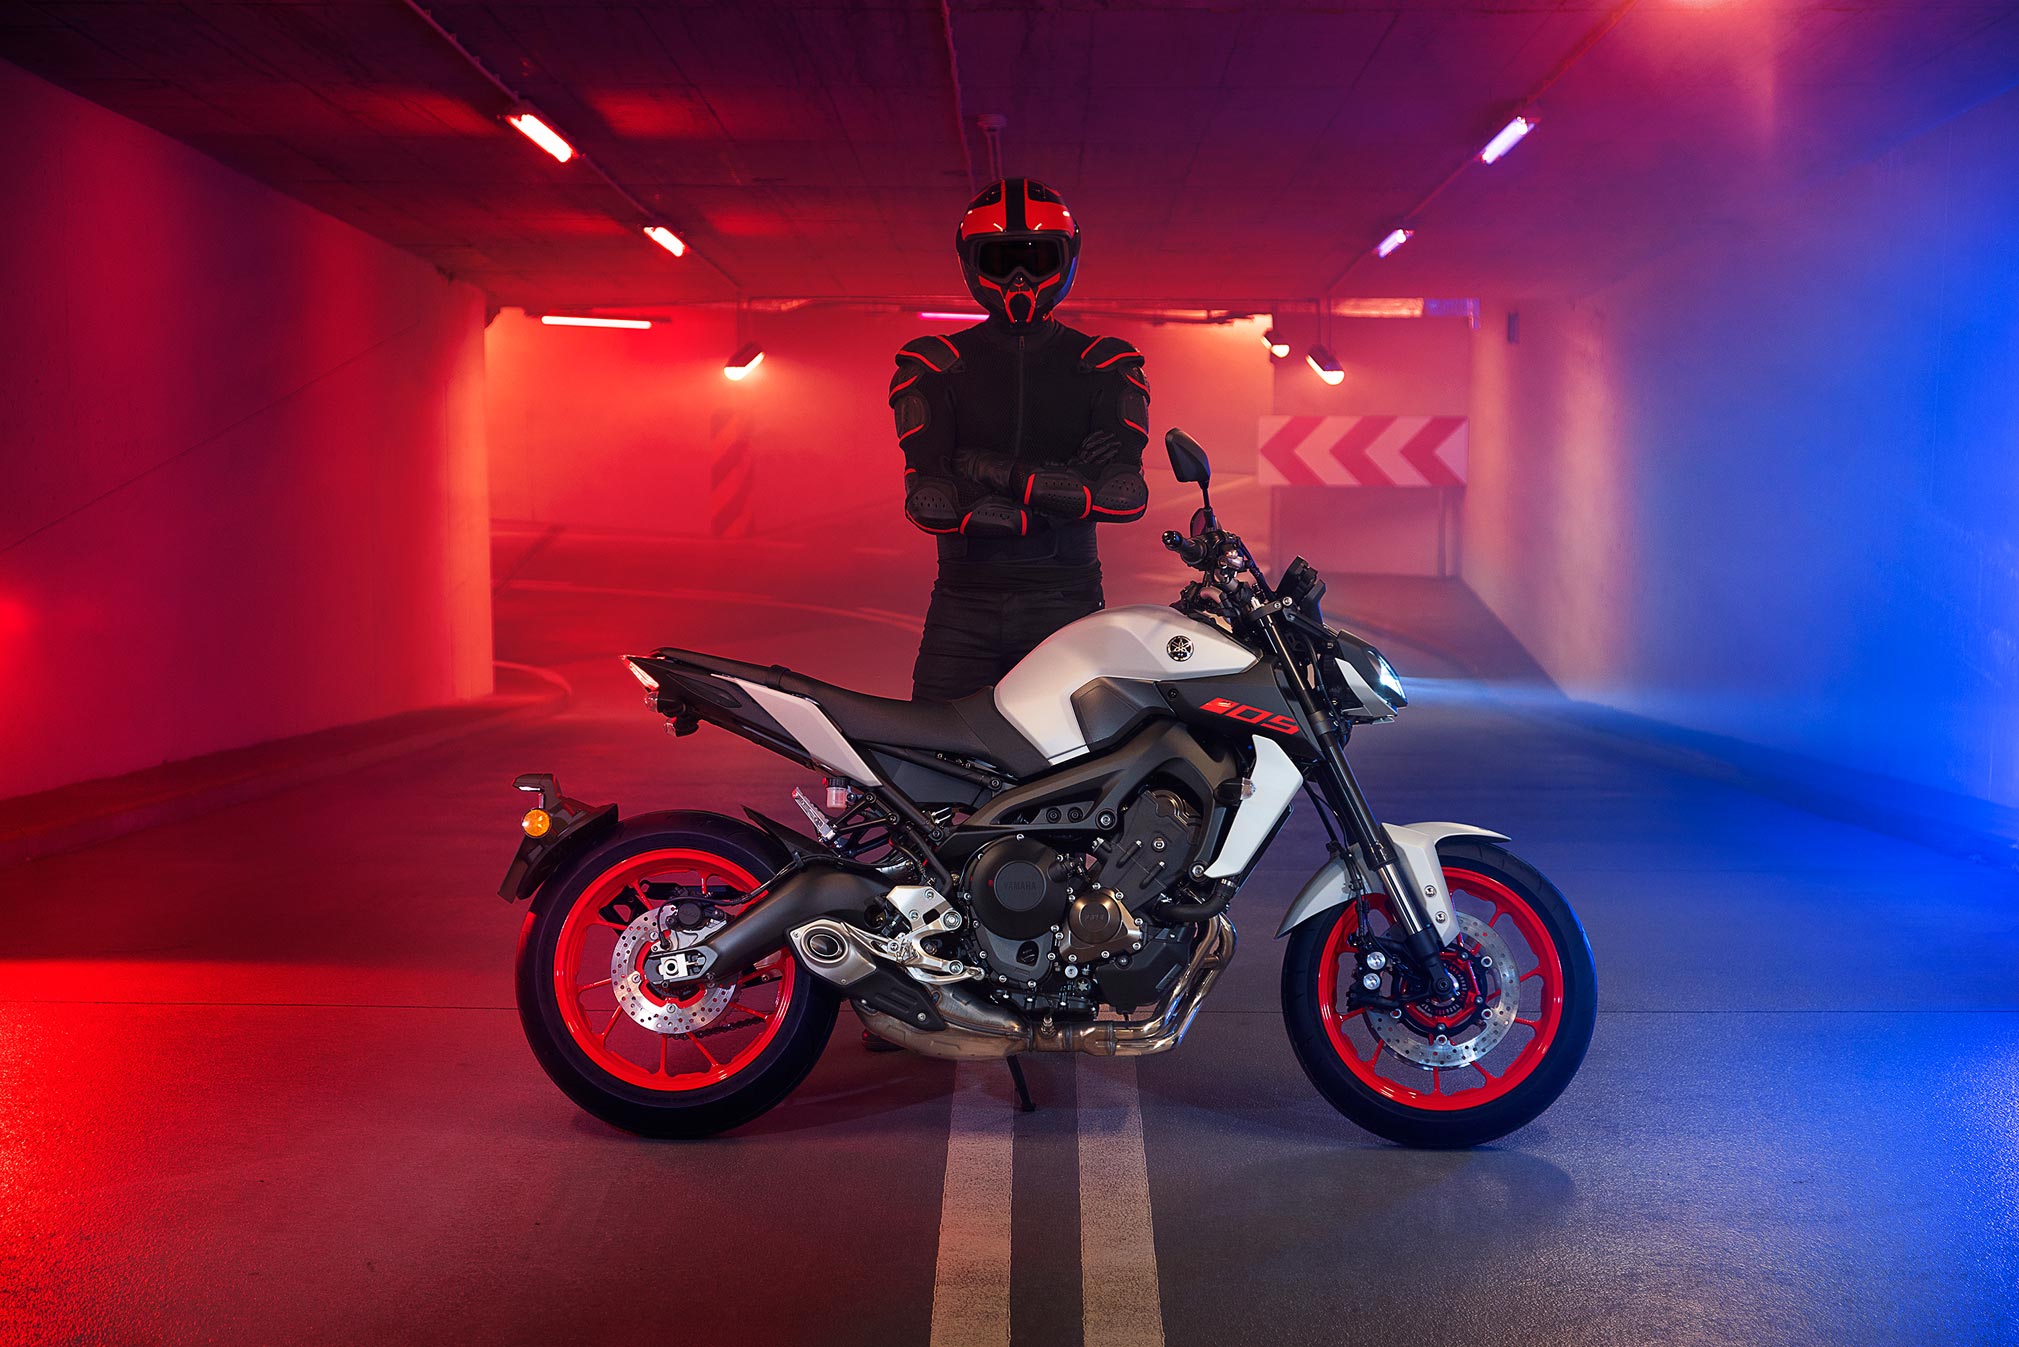 2019 Yamaha MT-09 Guide • Total Motorcycle